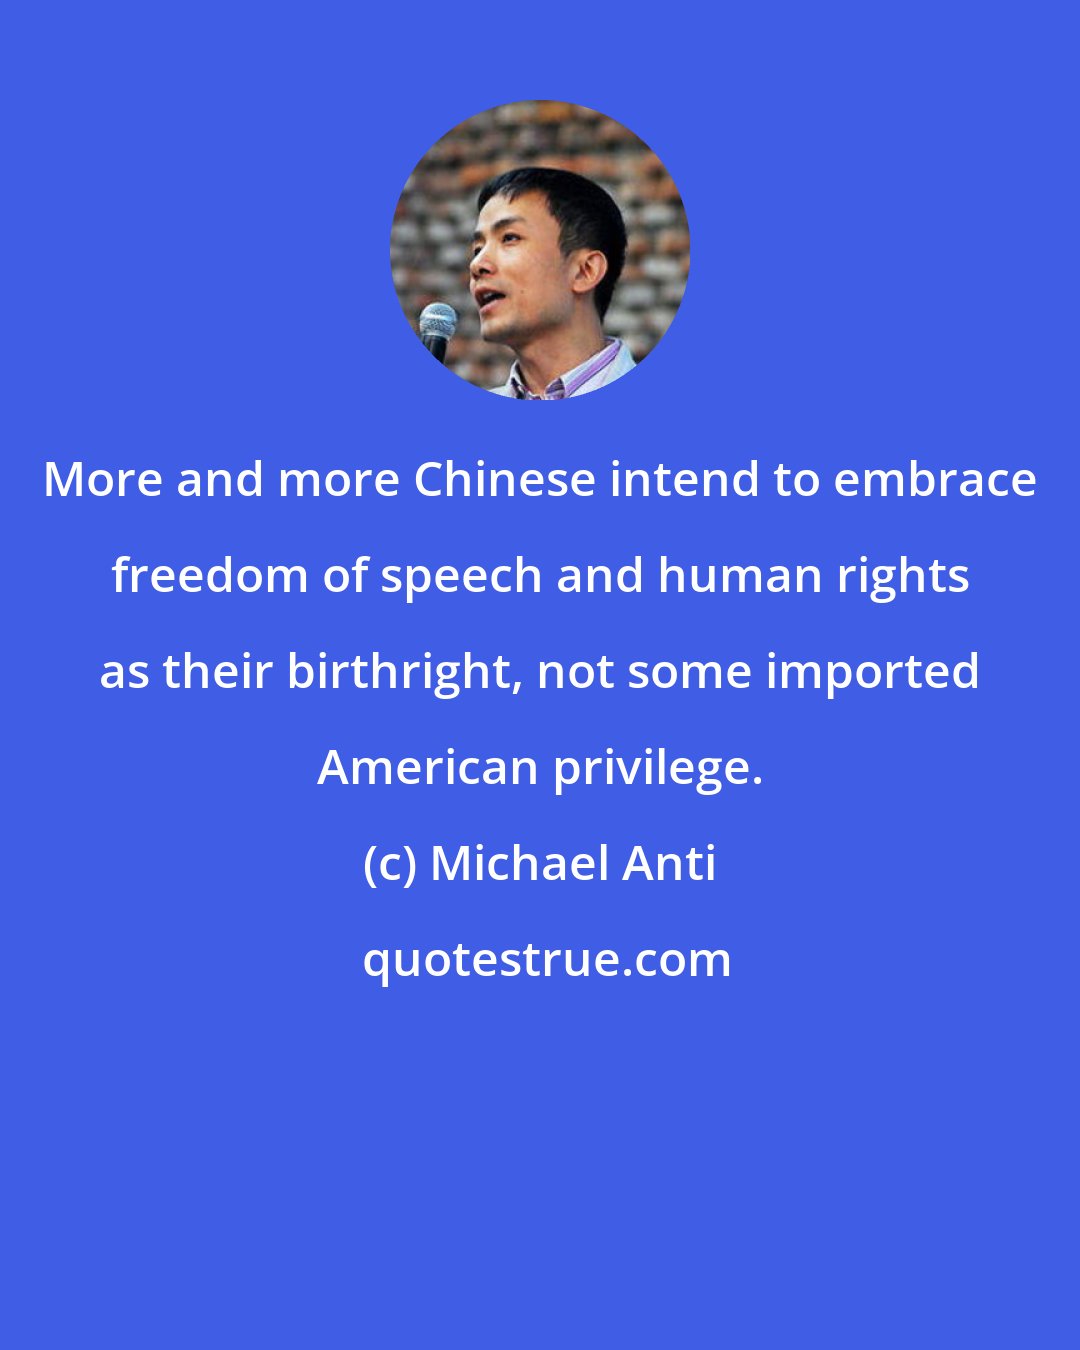 Michael Anti: More and more Chinese intend to embrace freedom of speech and human rights as their birthright, not some imported American privilege.